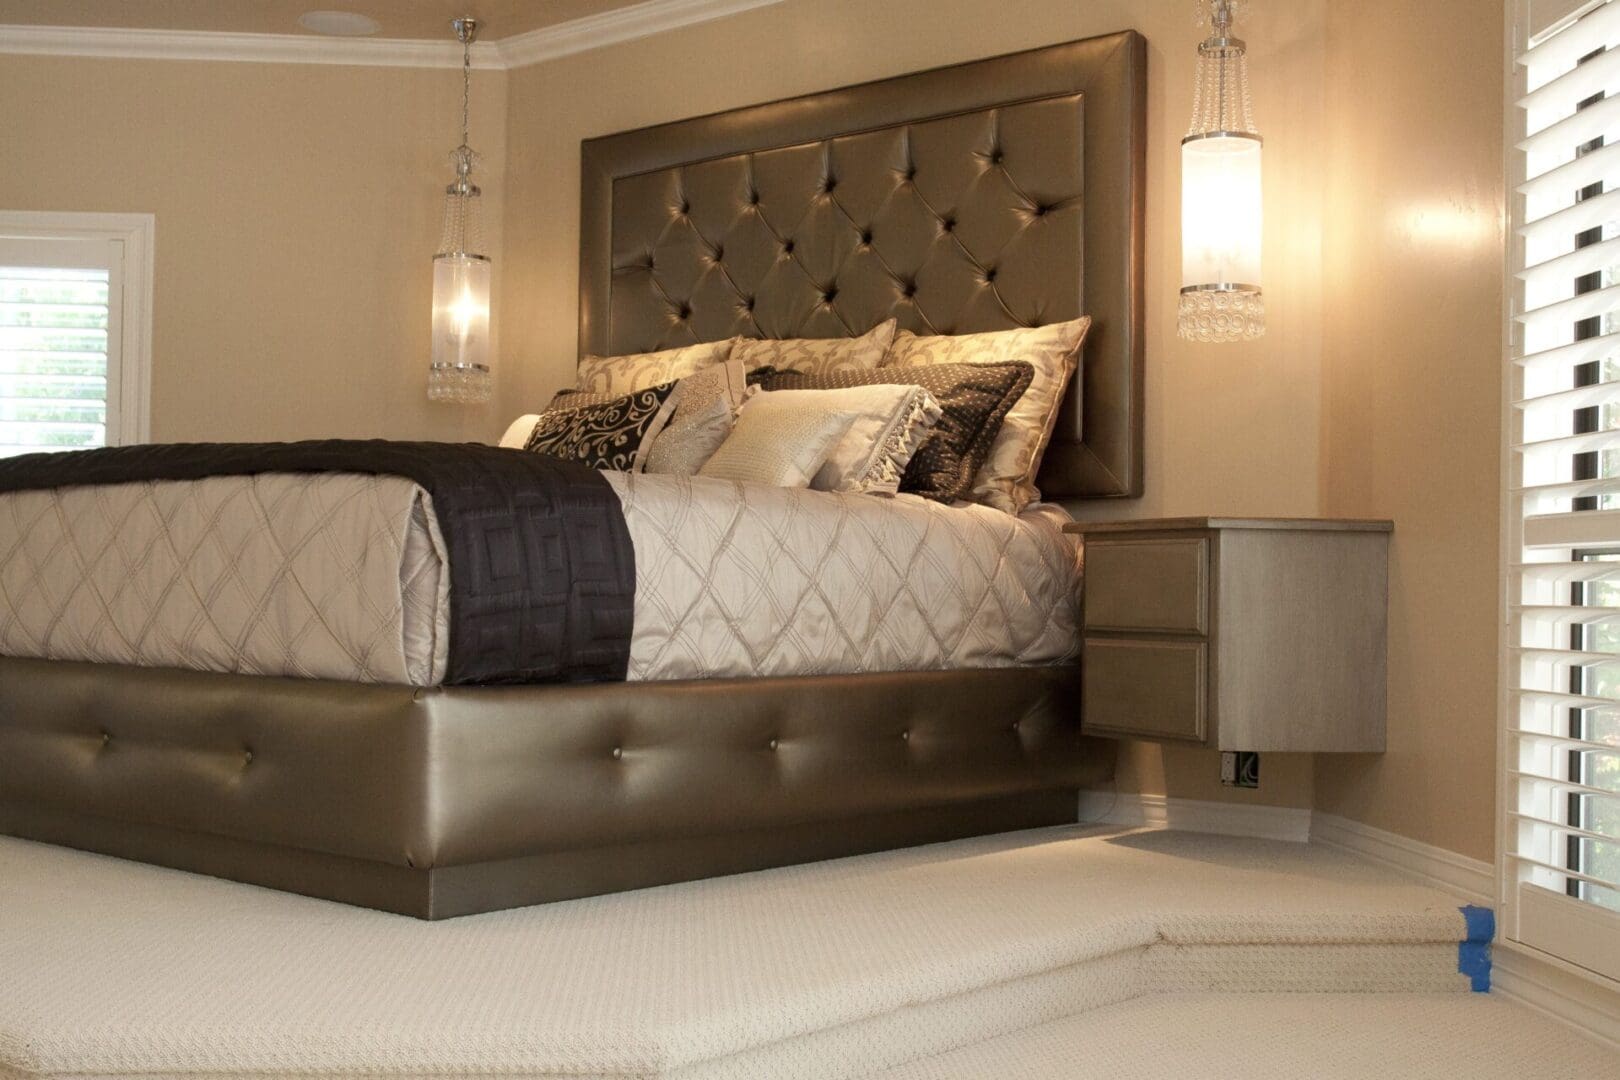 A bed room with a large bed and two night stands